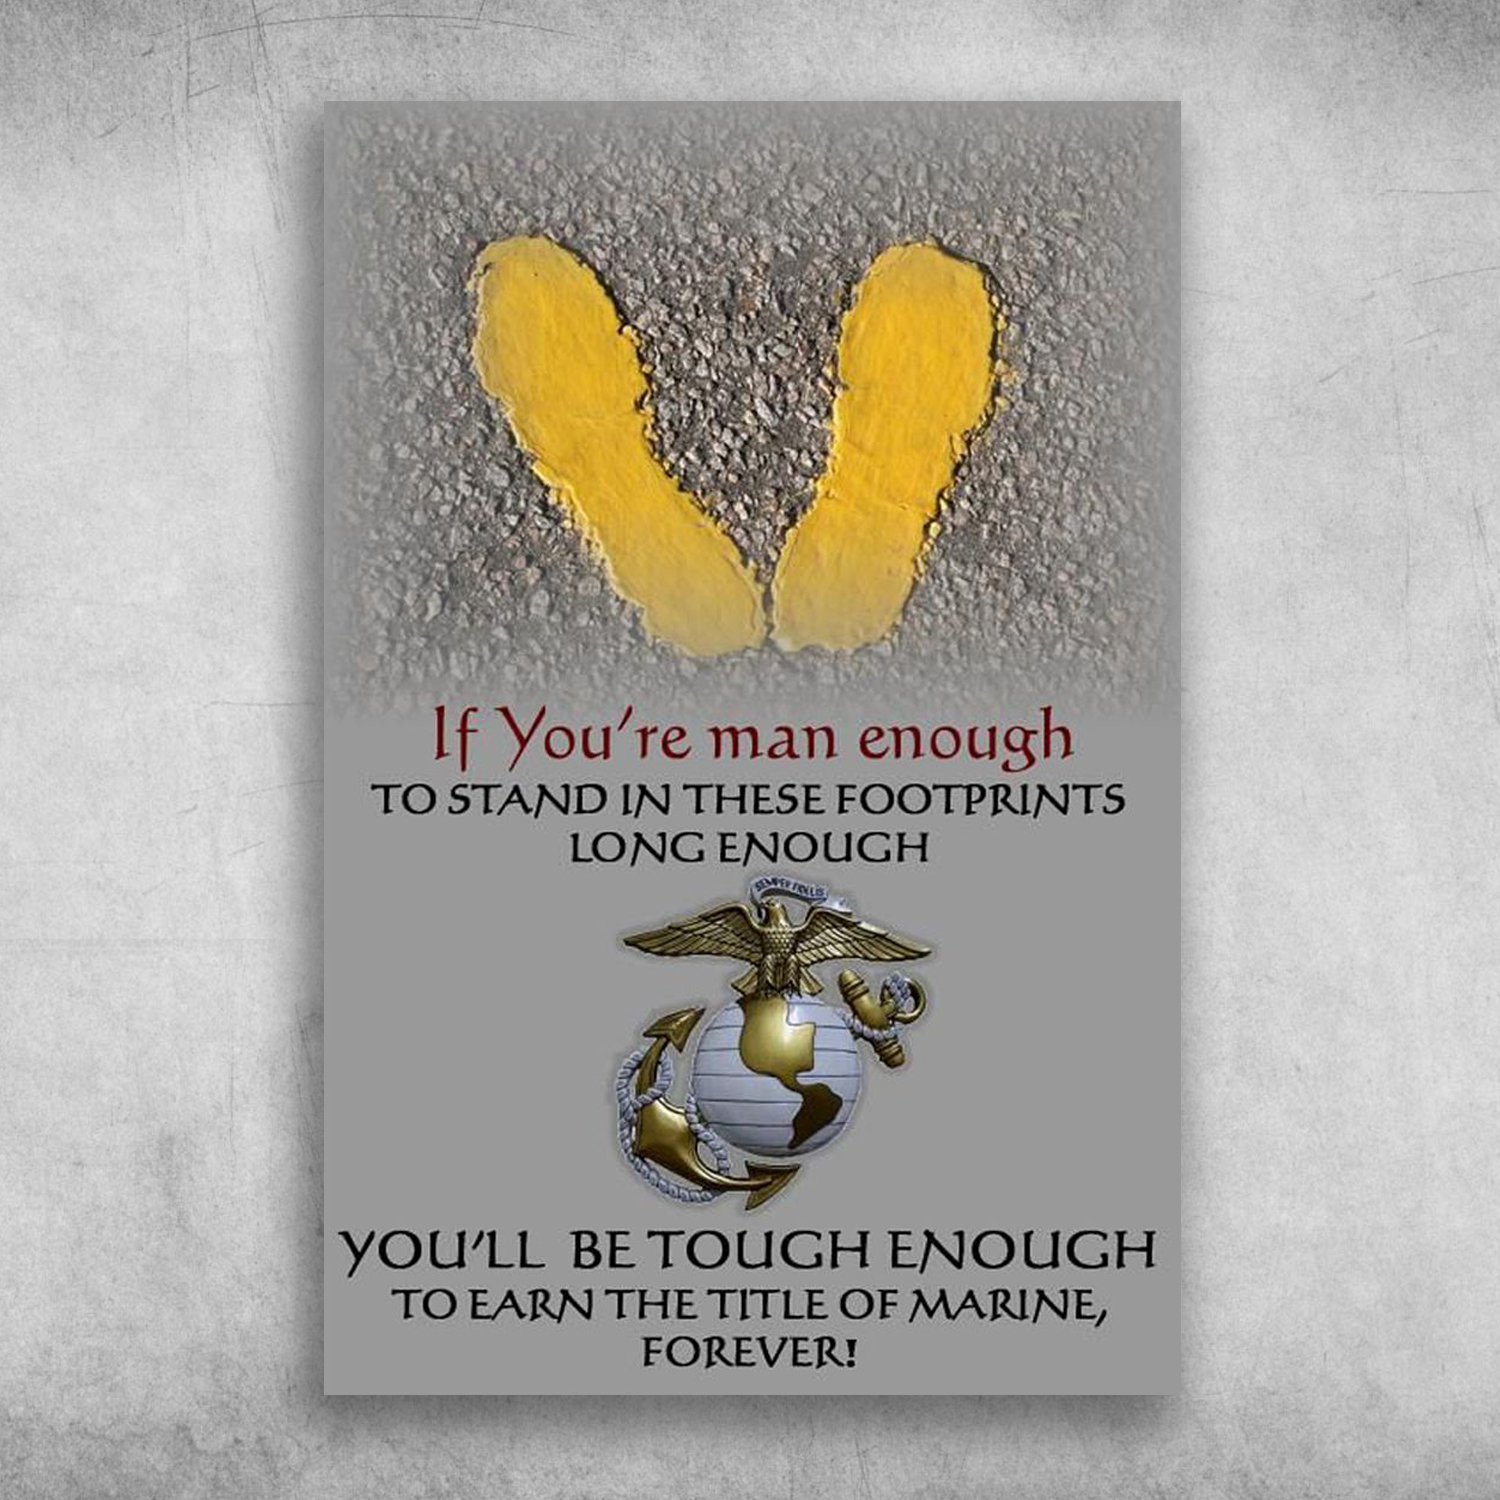 On The Yellow Footprints United States Marine Corps